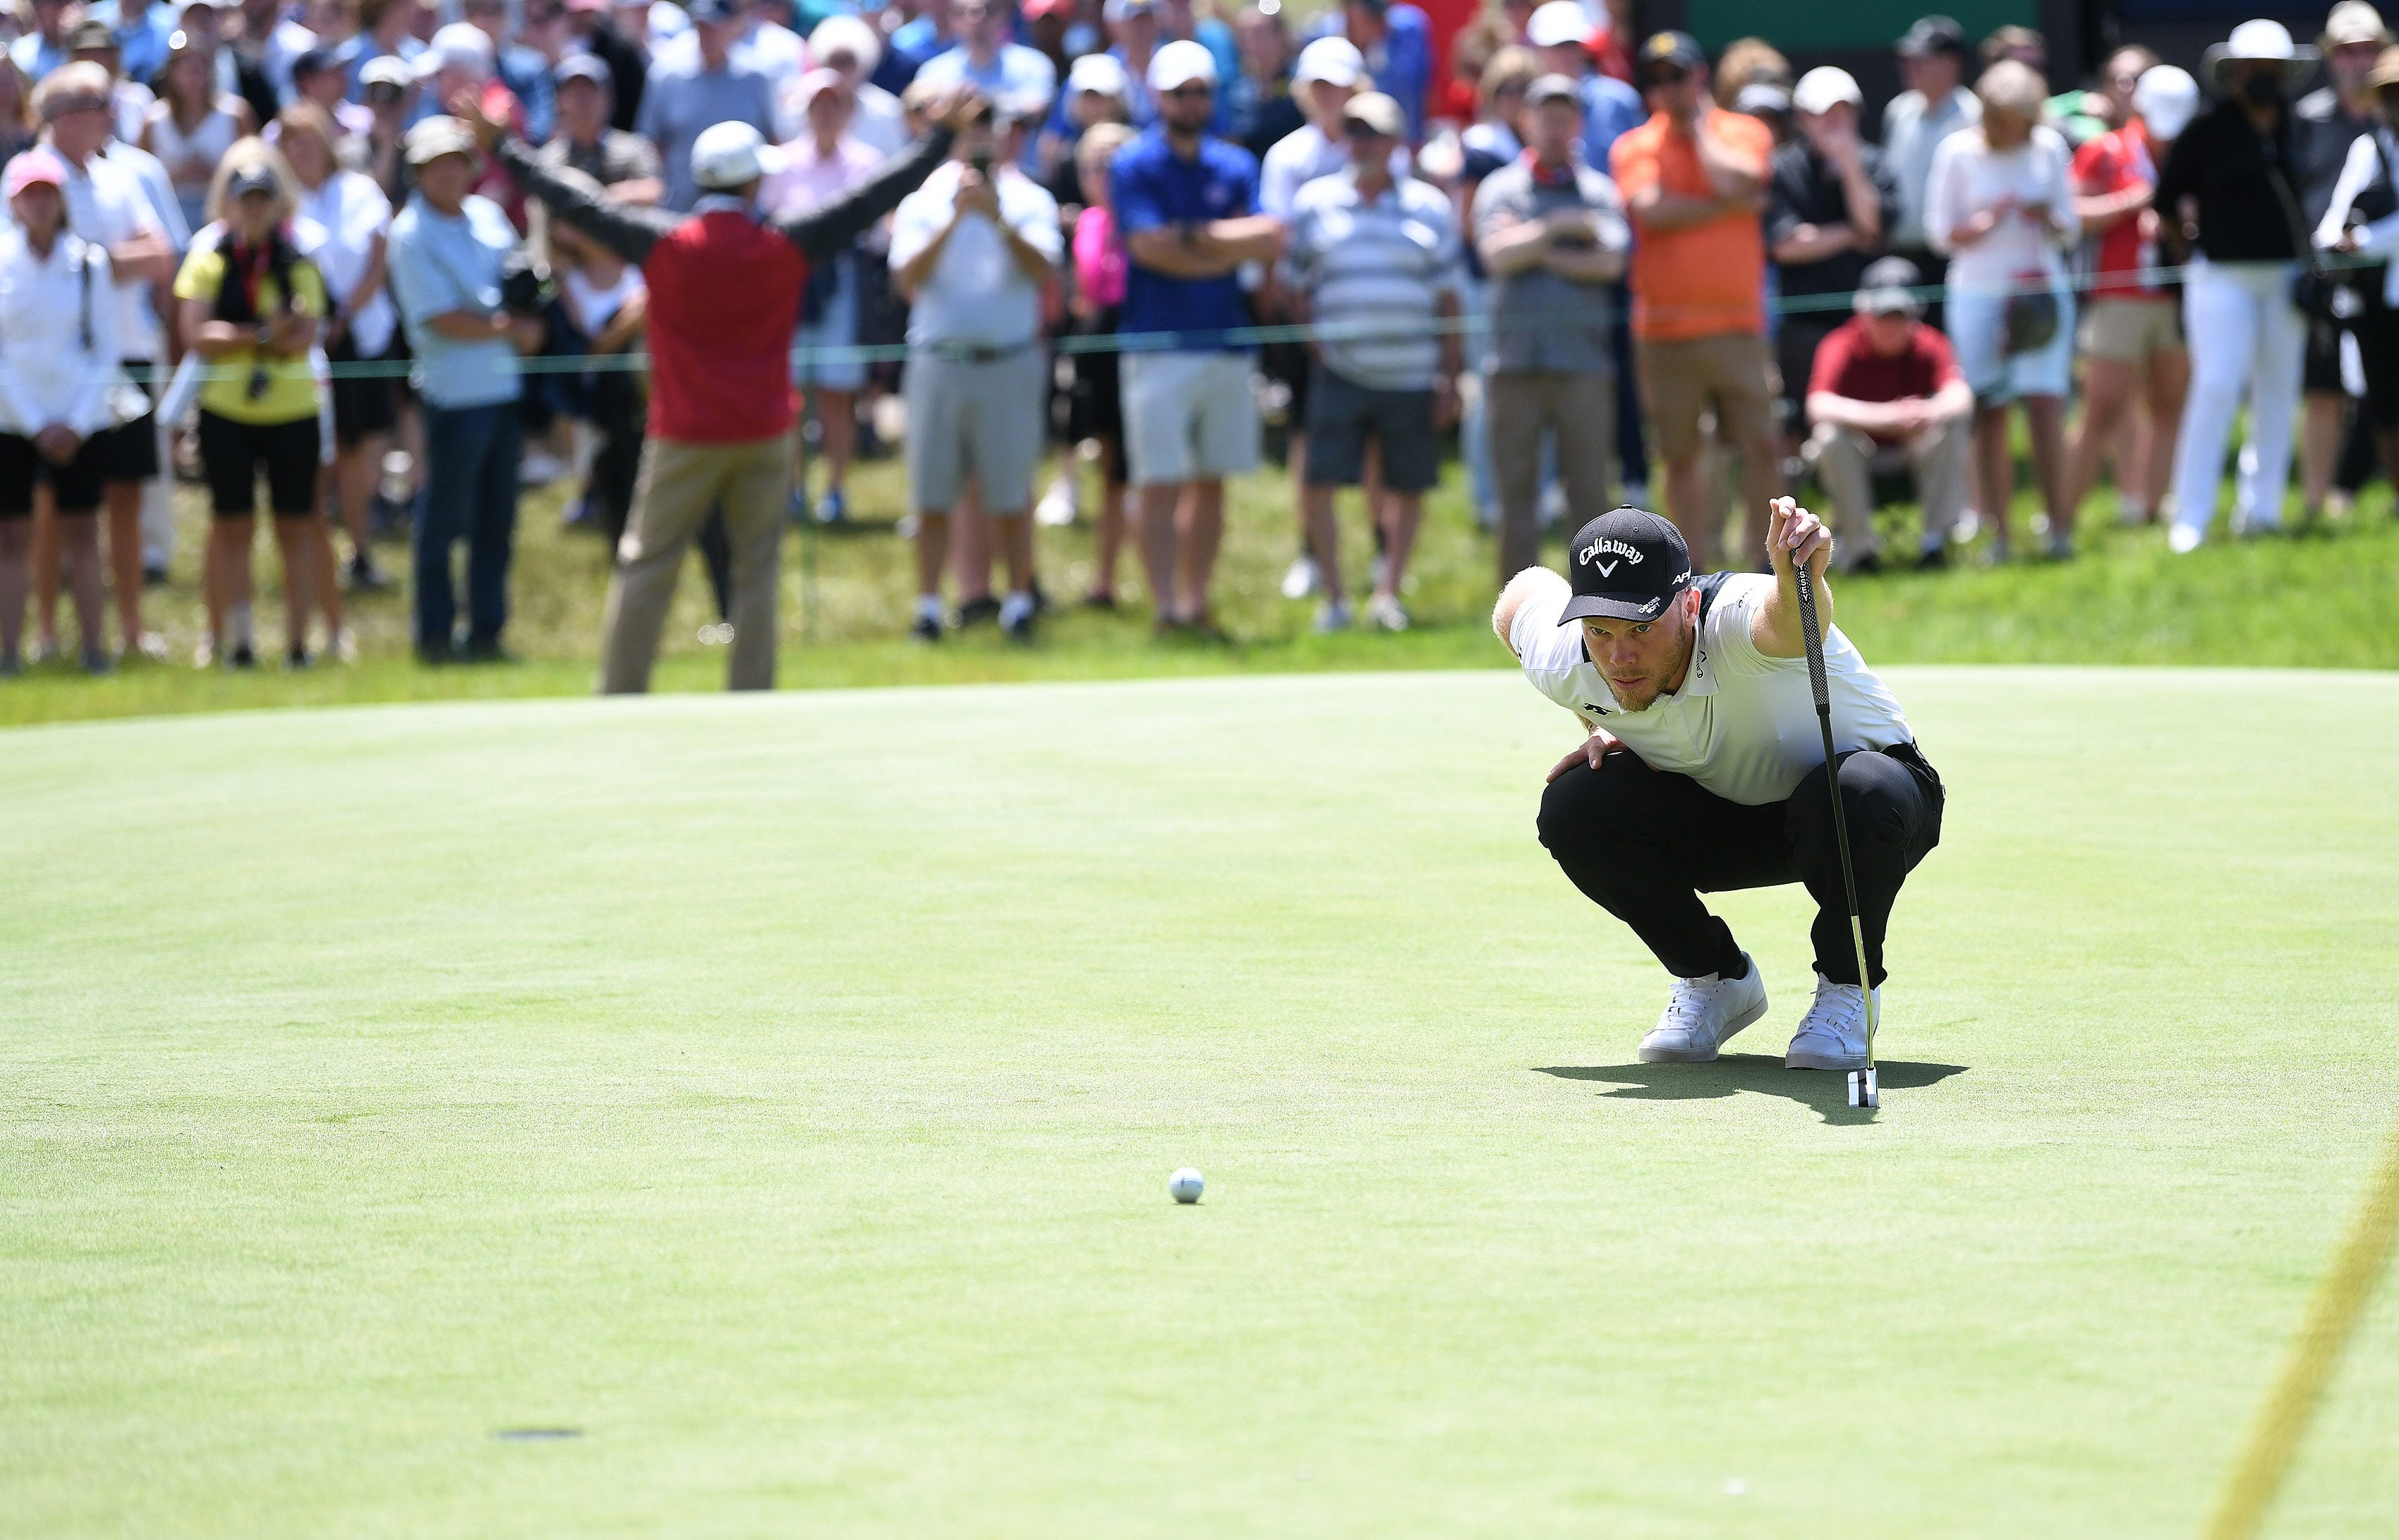 Danny Willett lines up his putt on the 18th green.